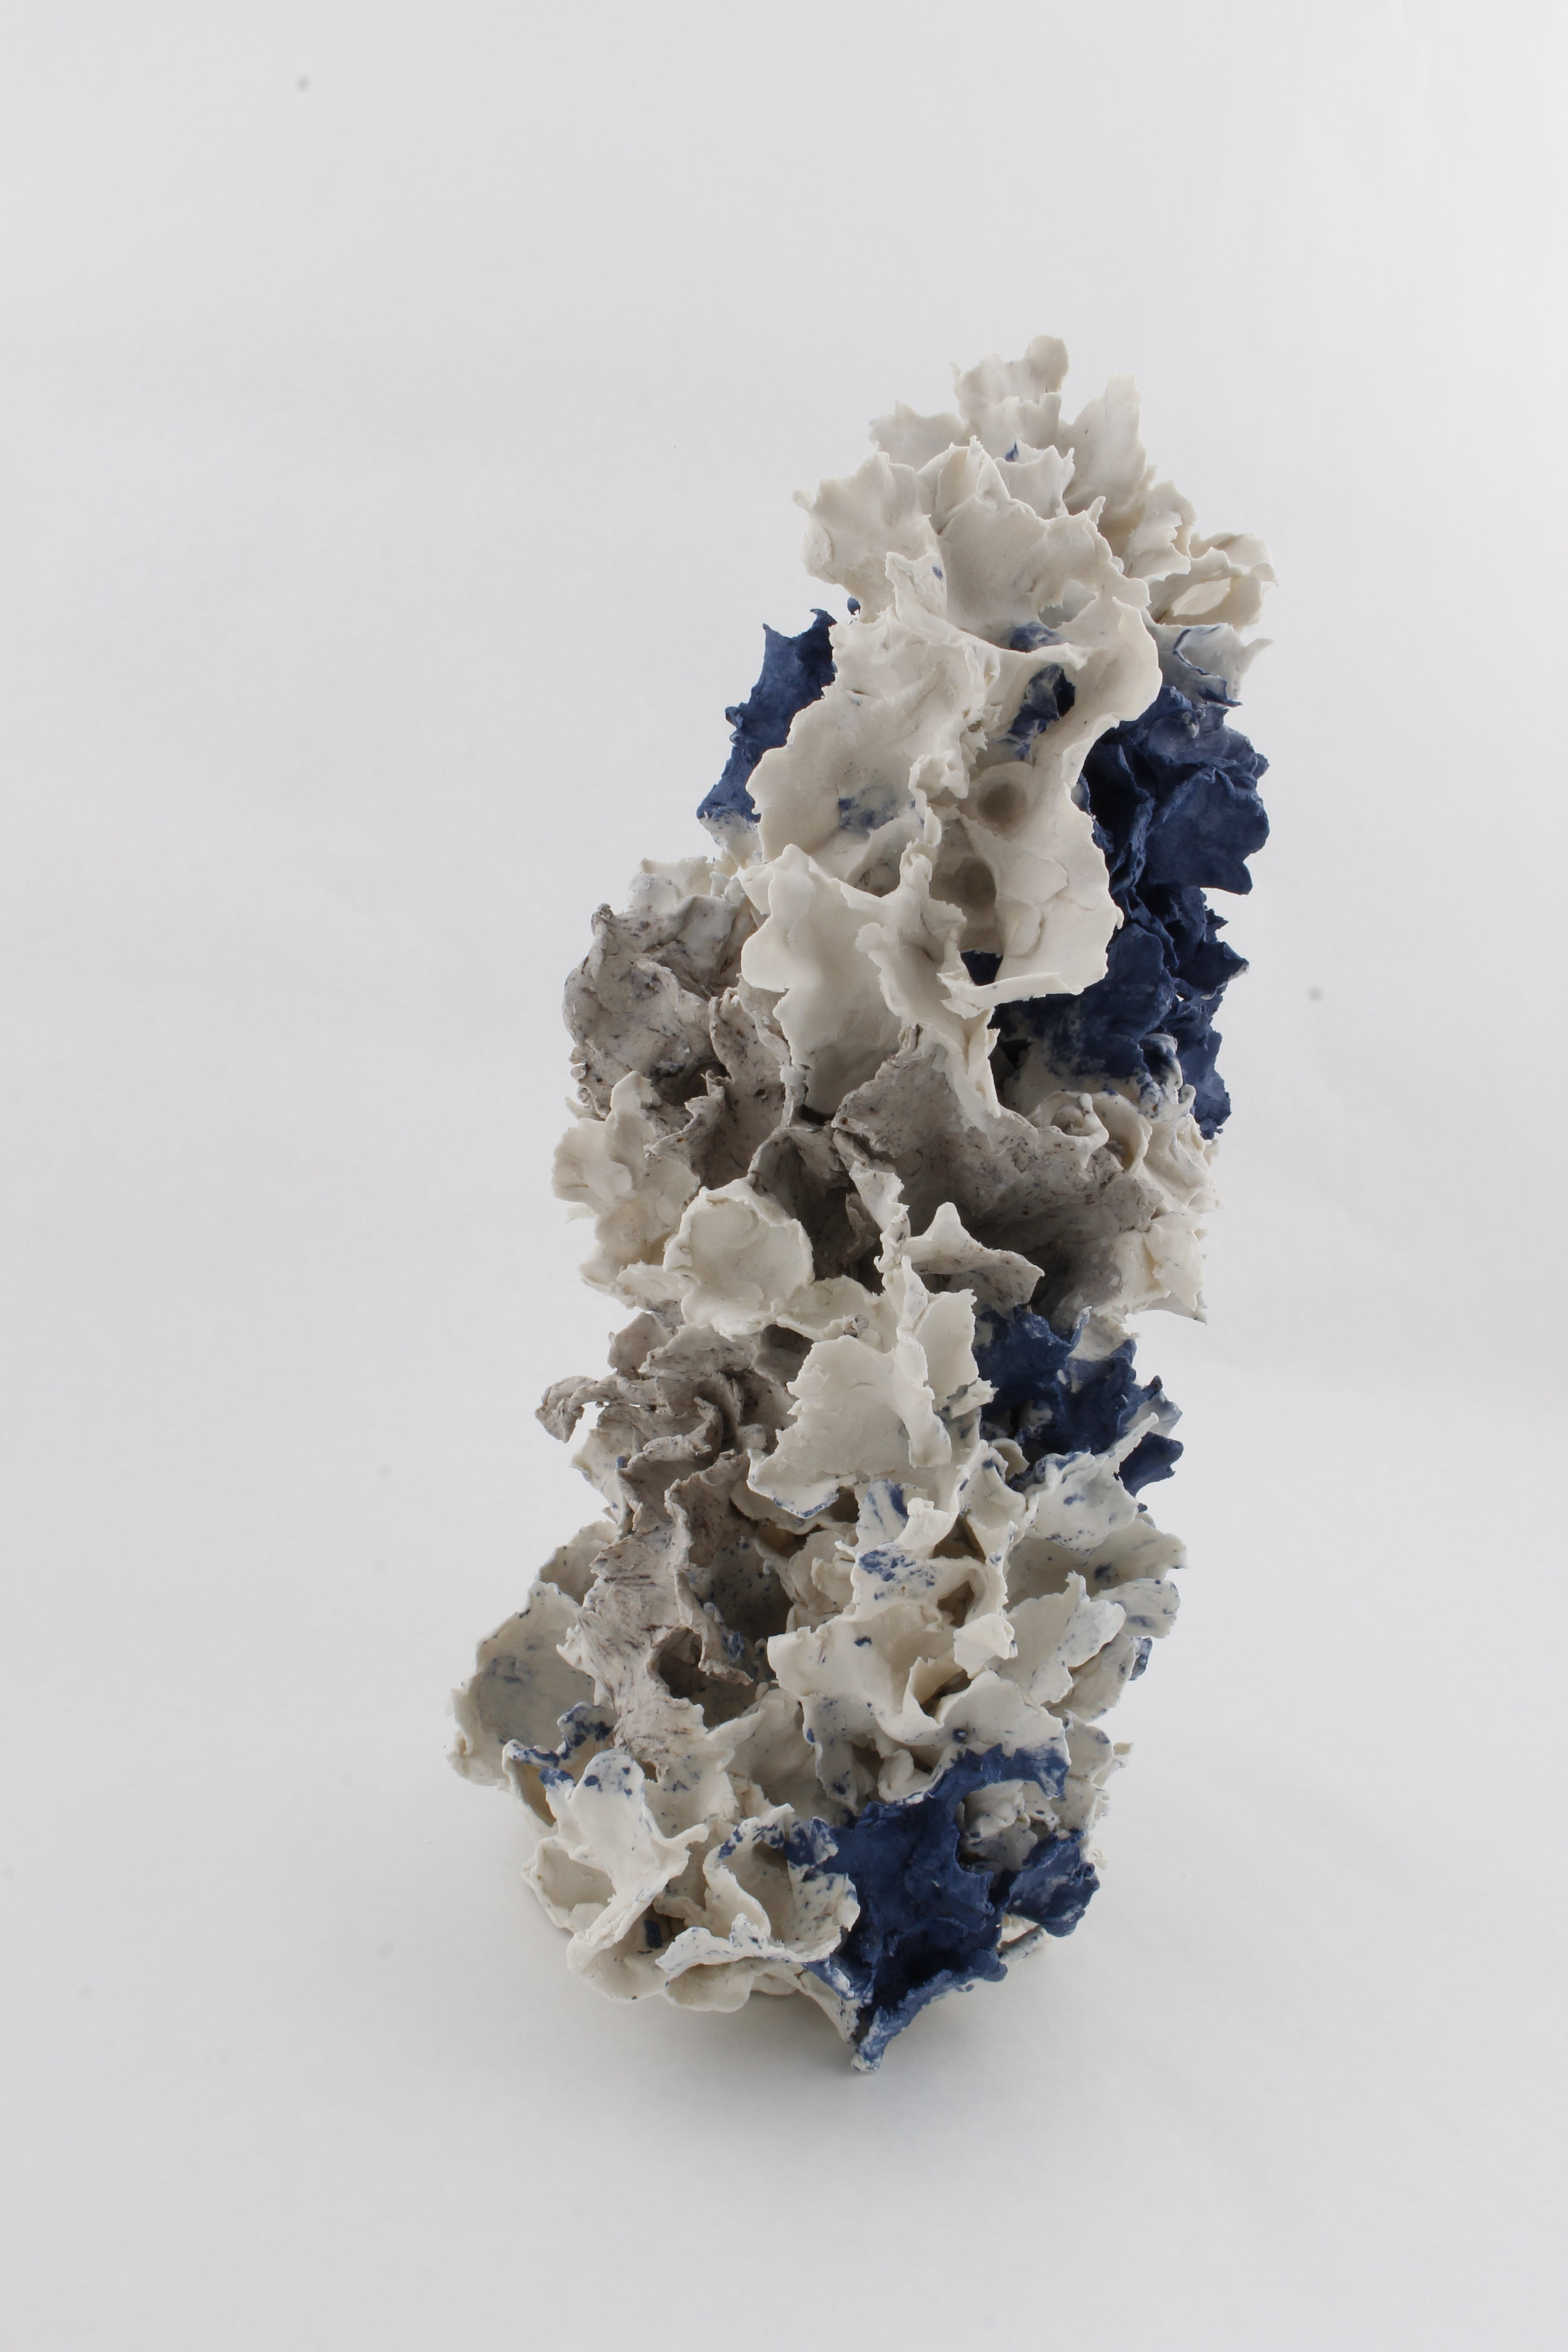  S imultaneous Growth , 2018. Paper clay, fire to cone 6, electric klin, 8 x 17 x 8 inch © Renqian Yang, courtesy Fou Gallery 